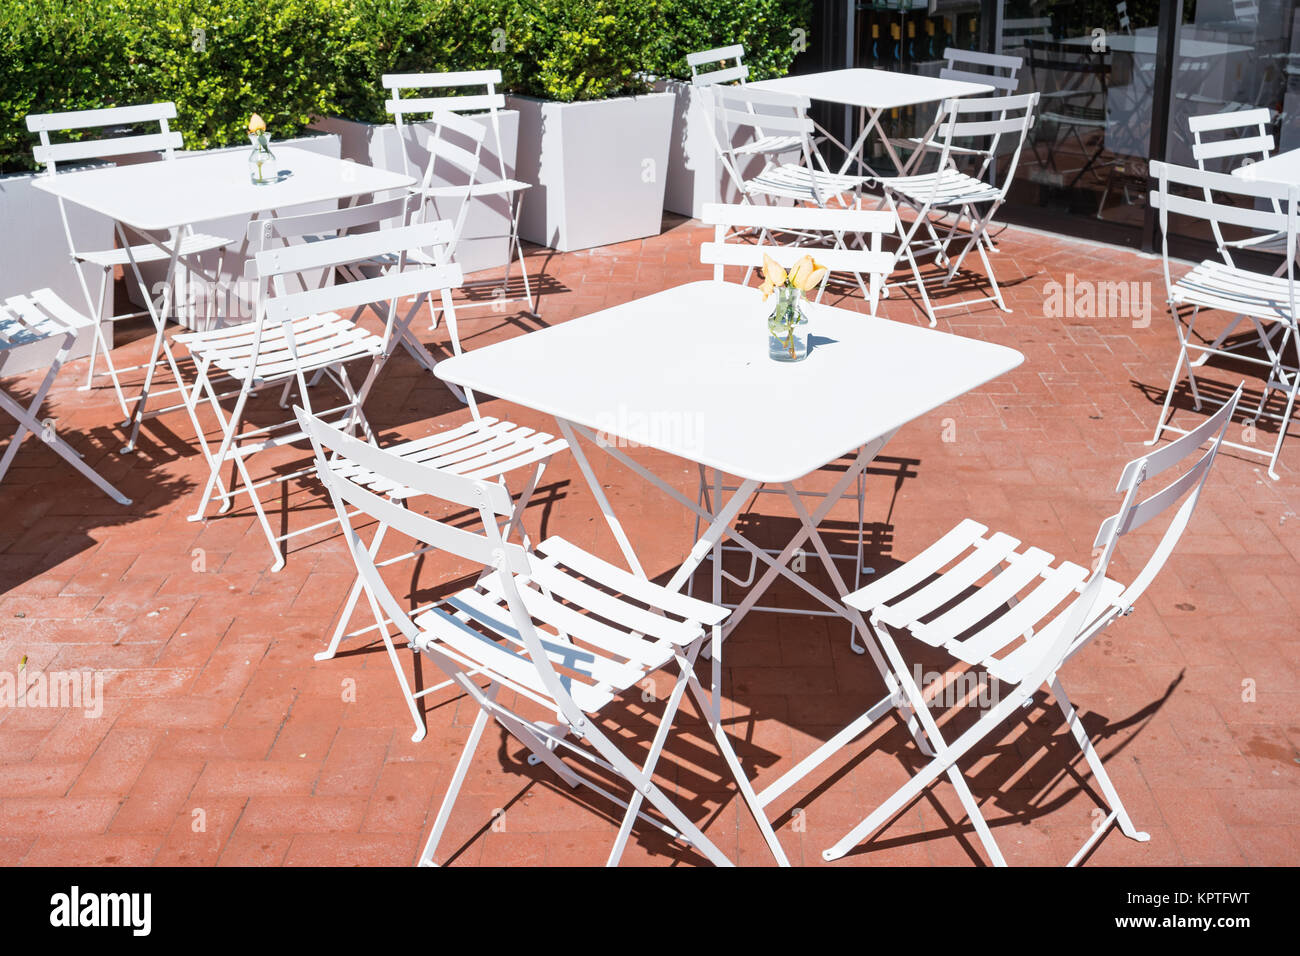 Cafe Restaurant patio with white chairs and tables in  San Francisco, California, USA on a sunny day. Stock Photo